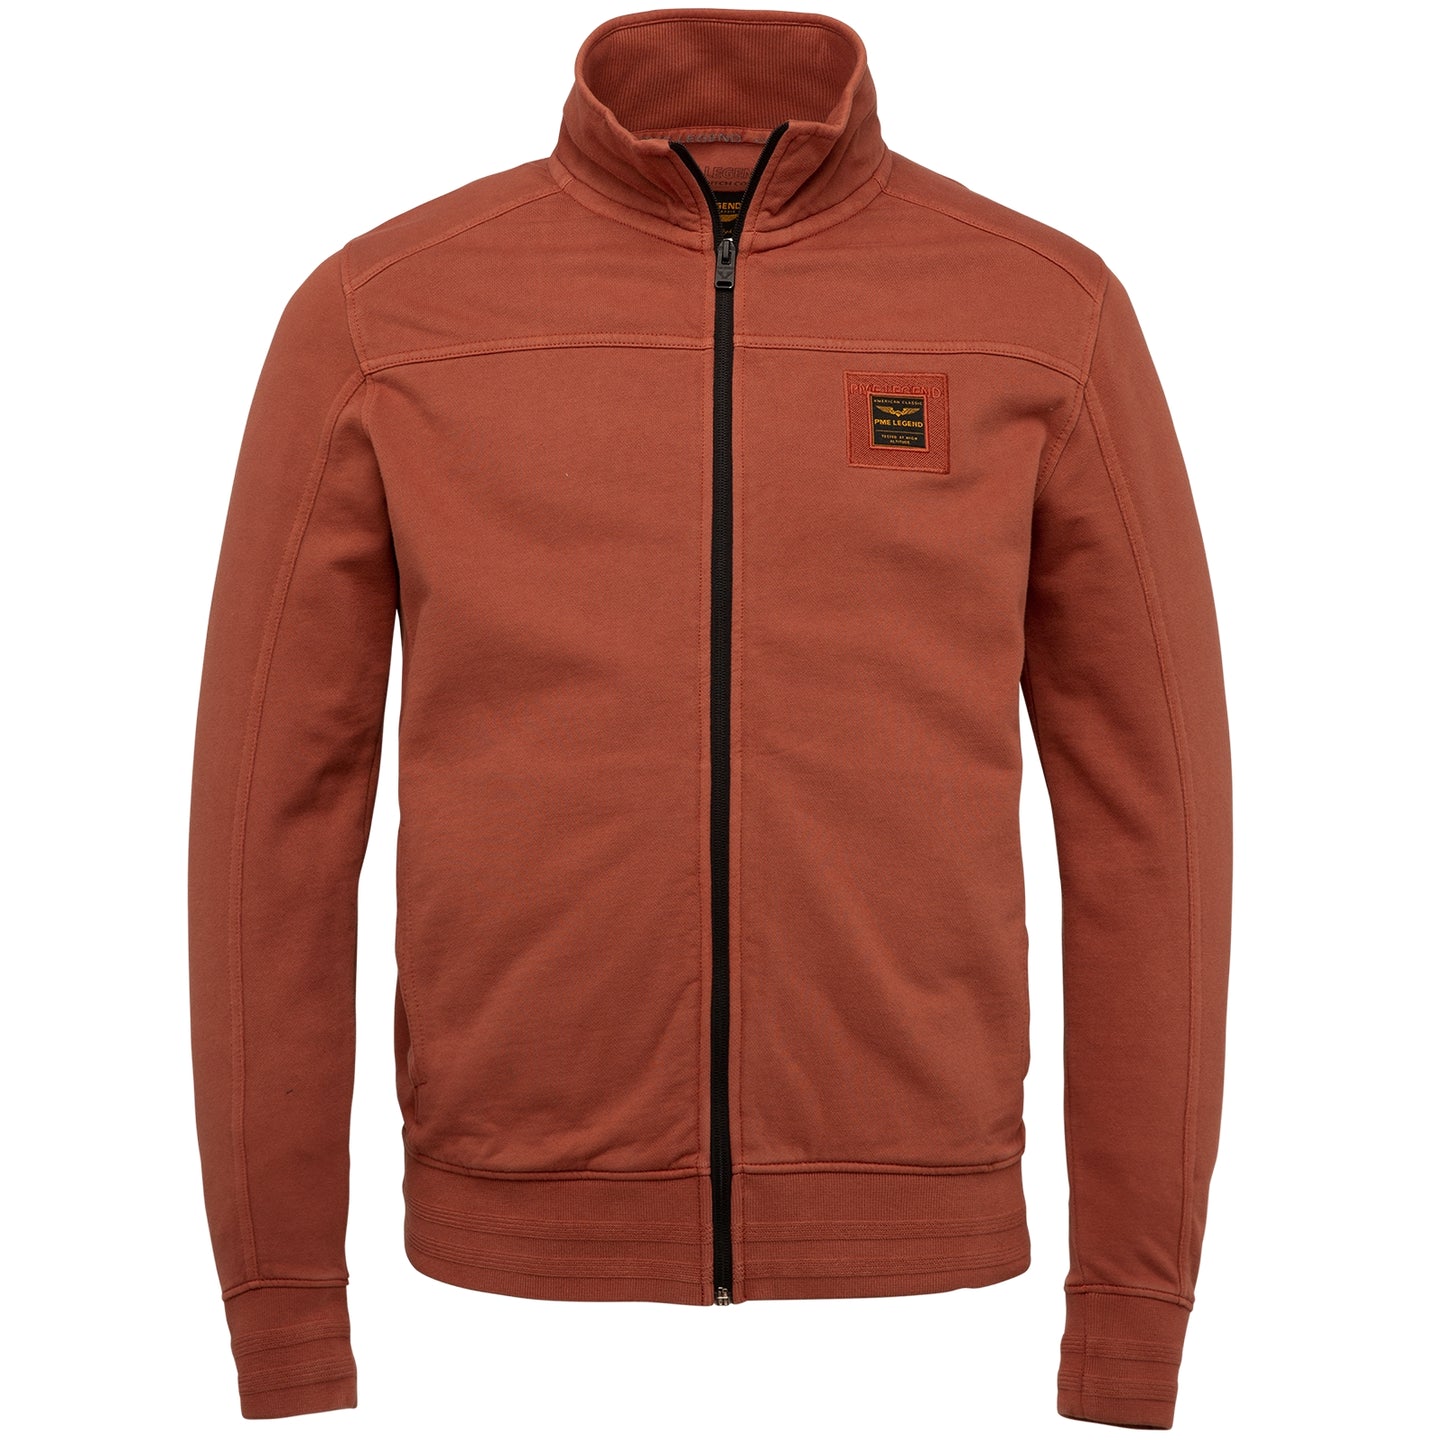 Zip Jacket Dry Terry Unbrushed